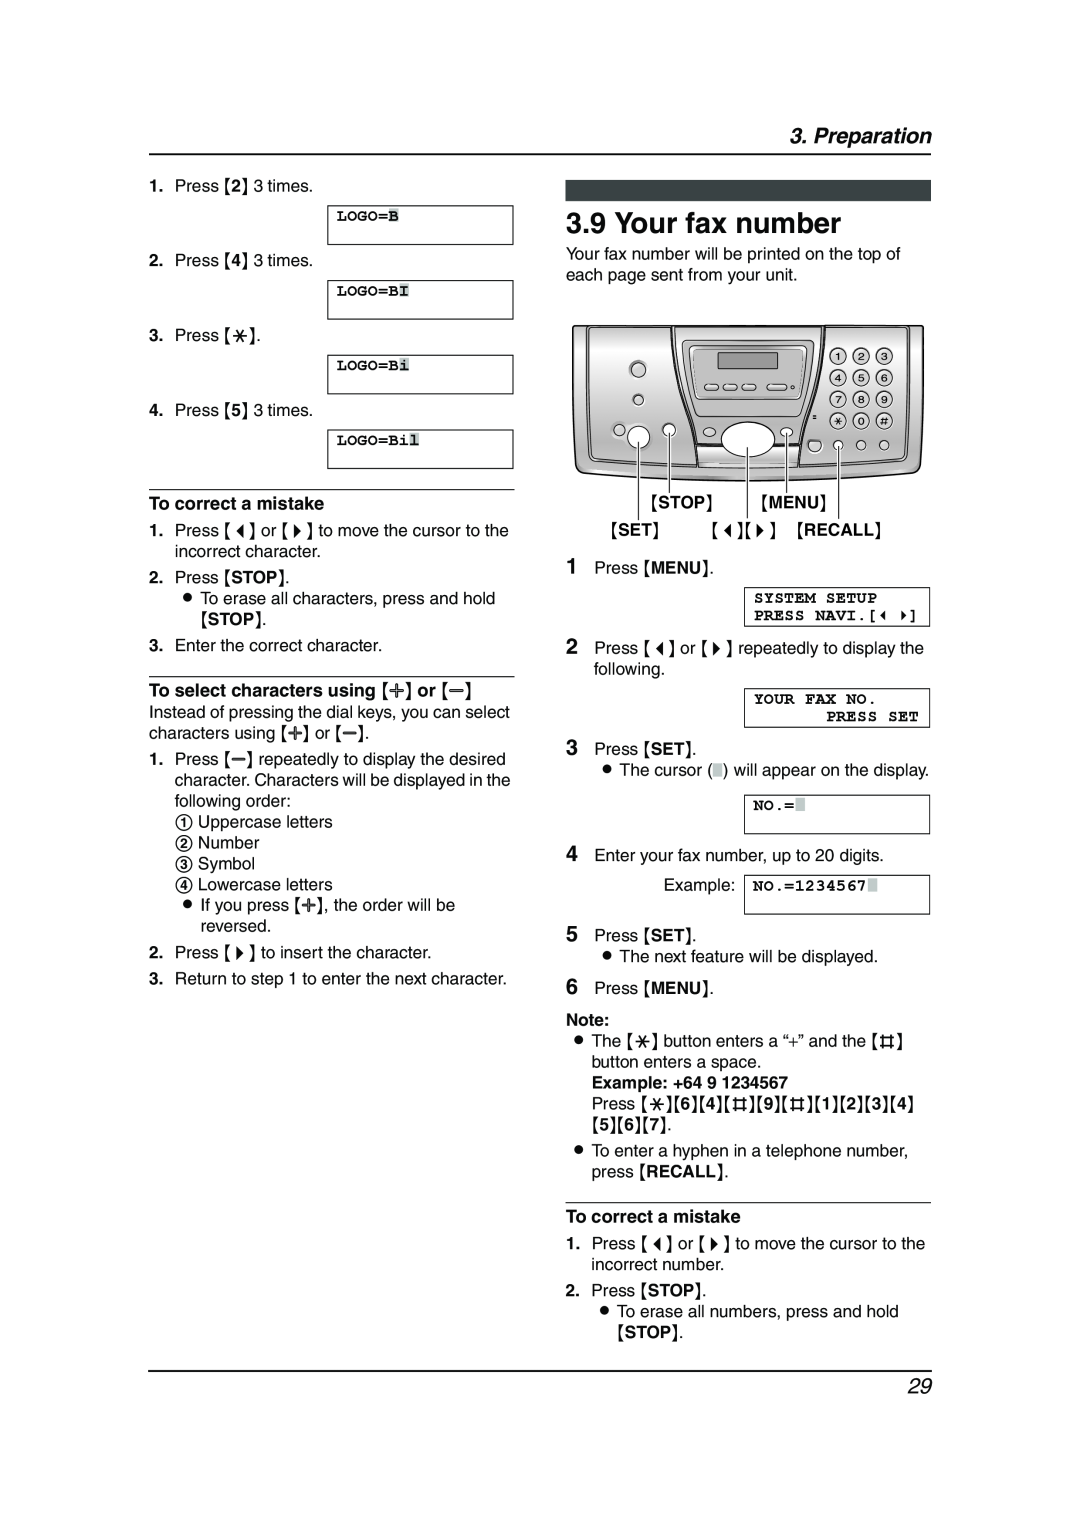 Panasonic KX-FC241AL manual Your fax number, To select characters using A or B, Stop Menu, Example +64 9, Preparation 